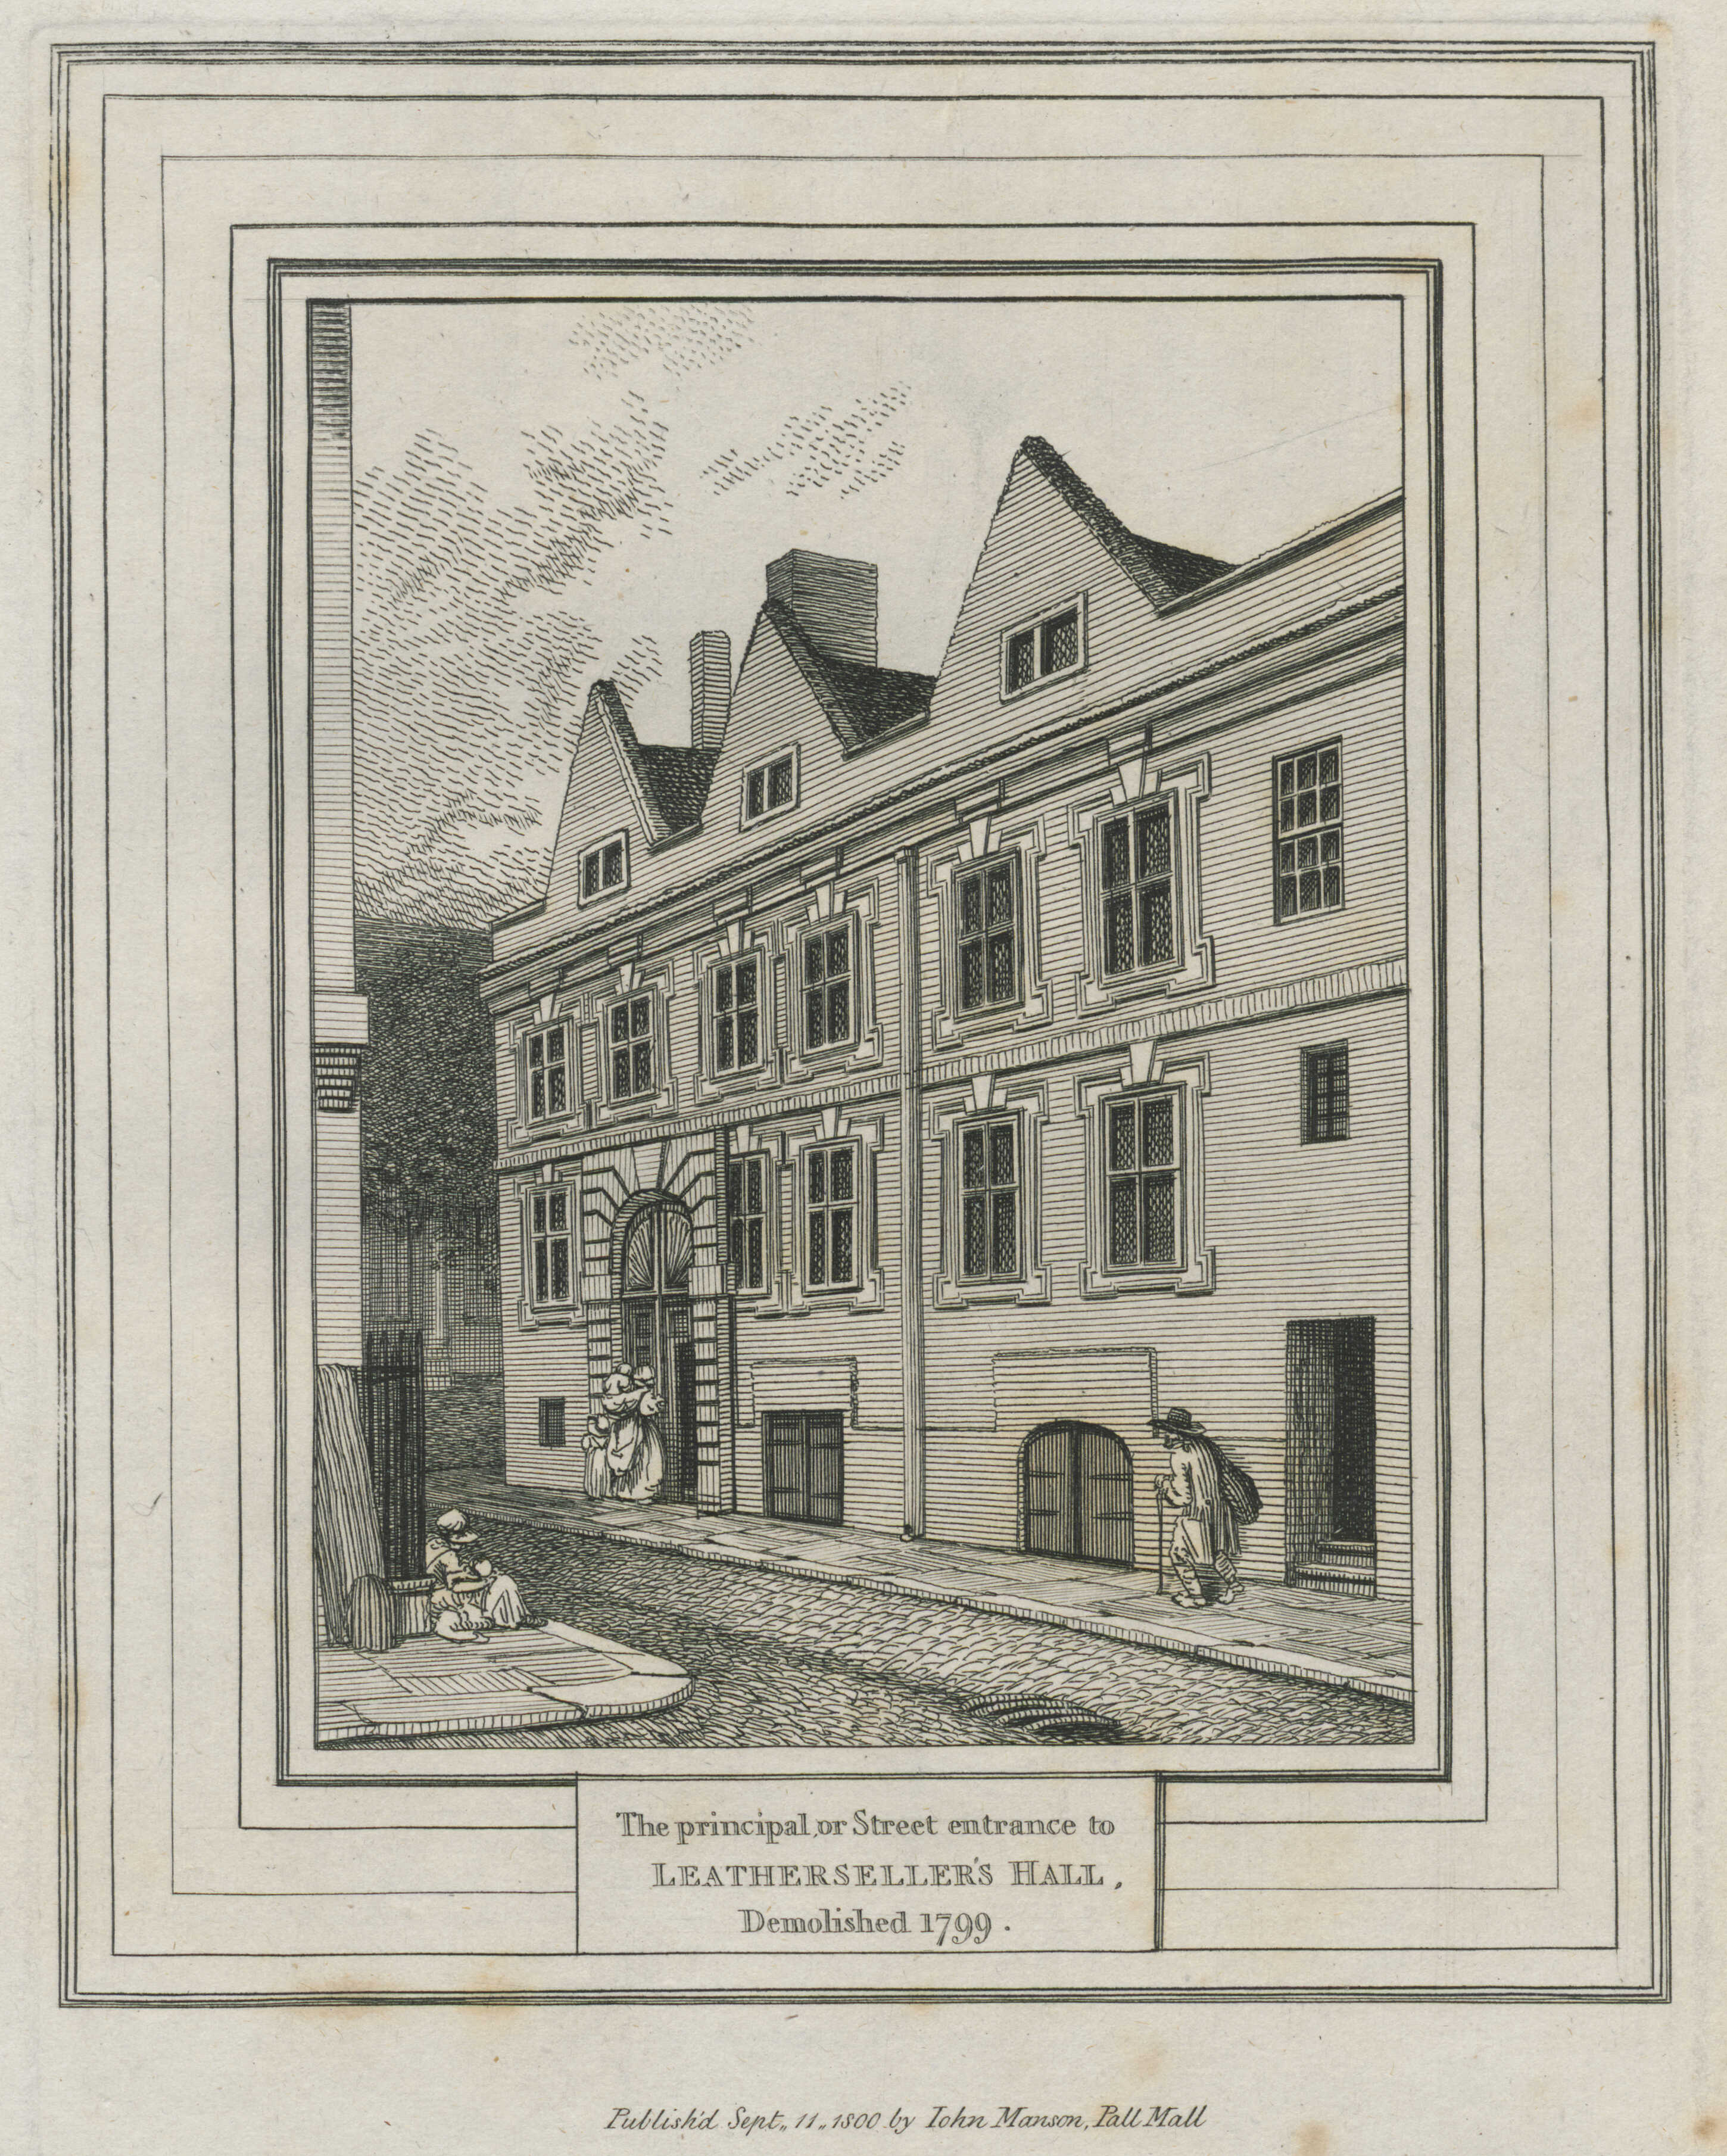 86-the-principal-or-street-entrance-to-leathersellers-hall-demolished-1799